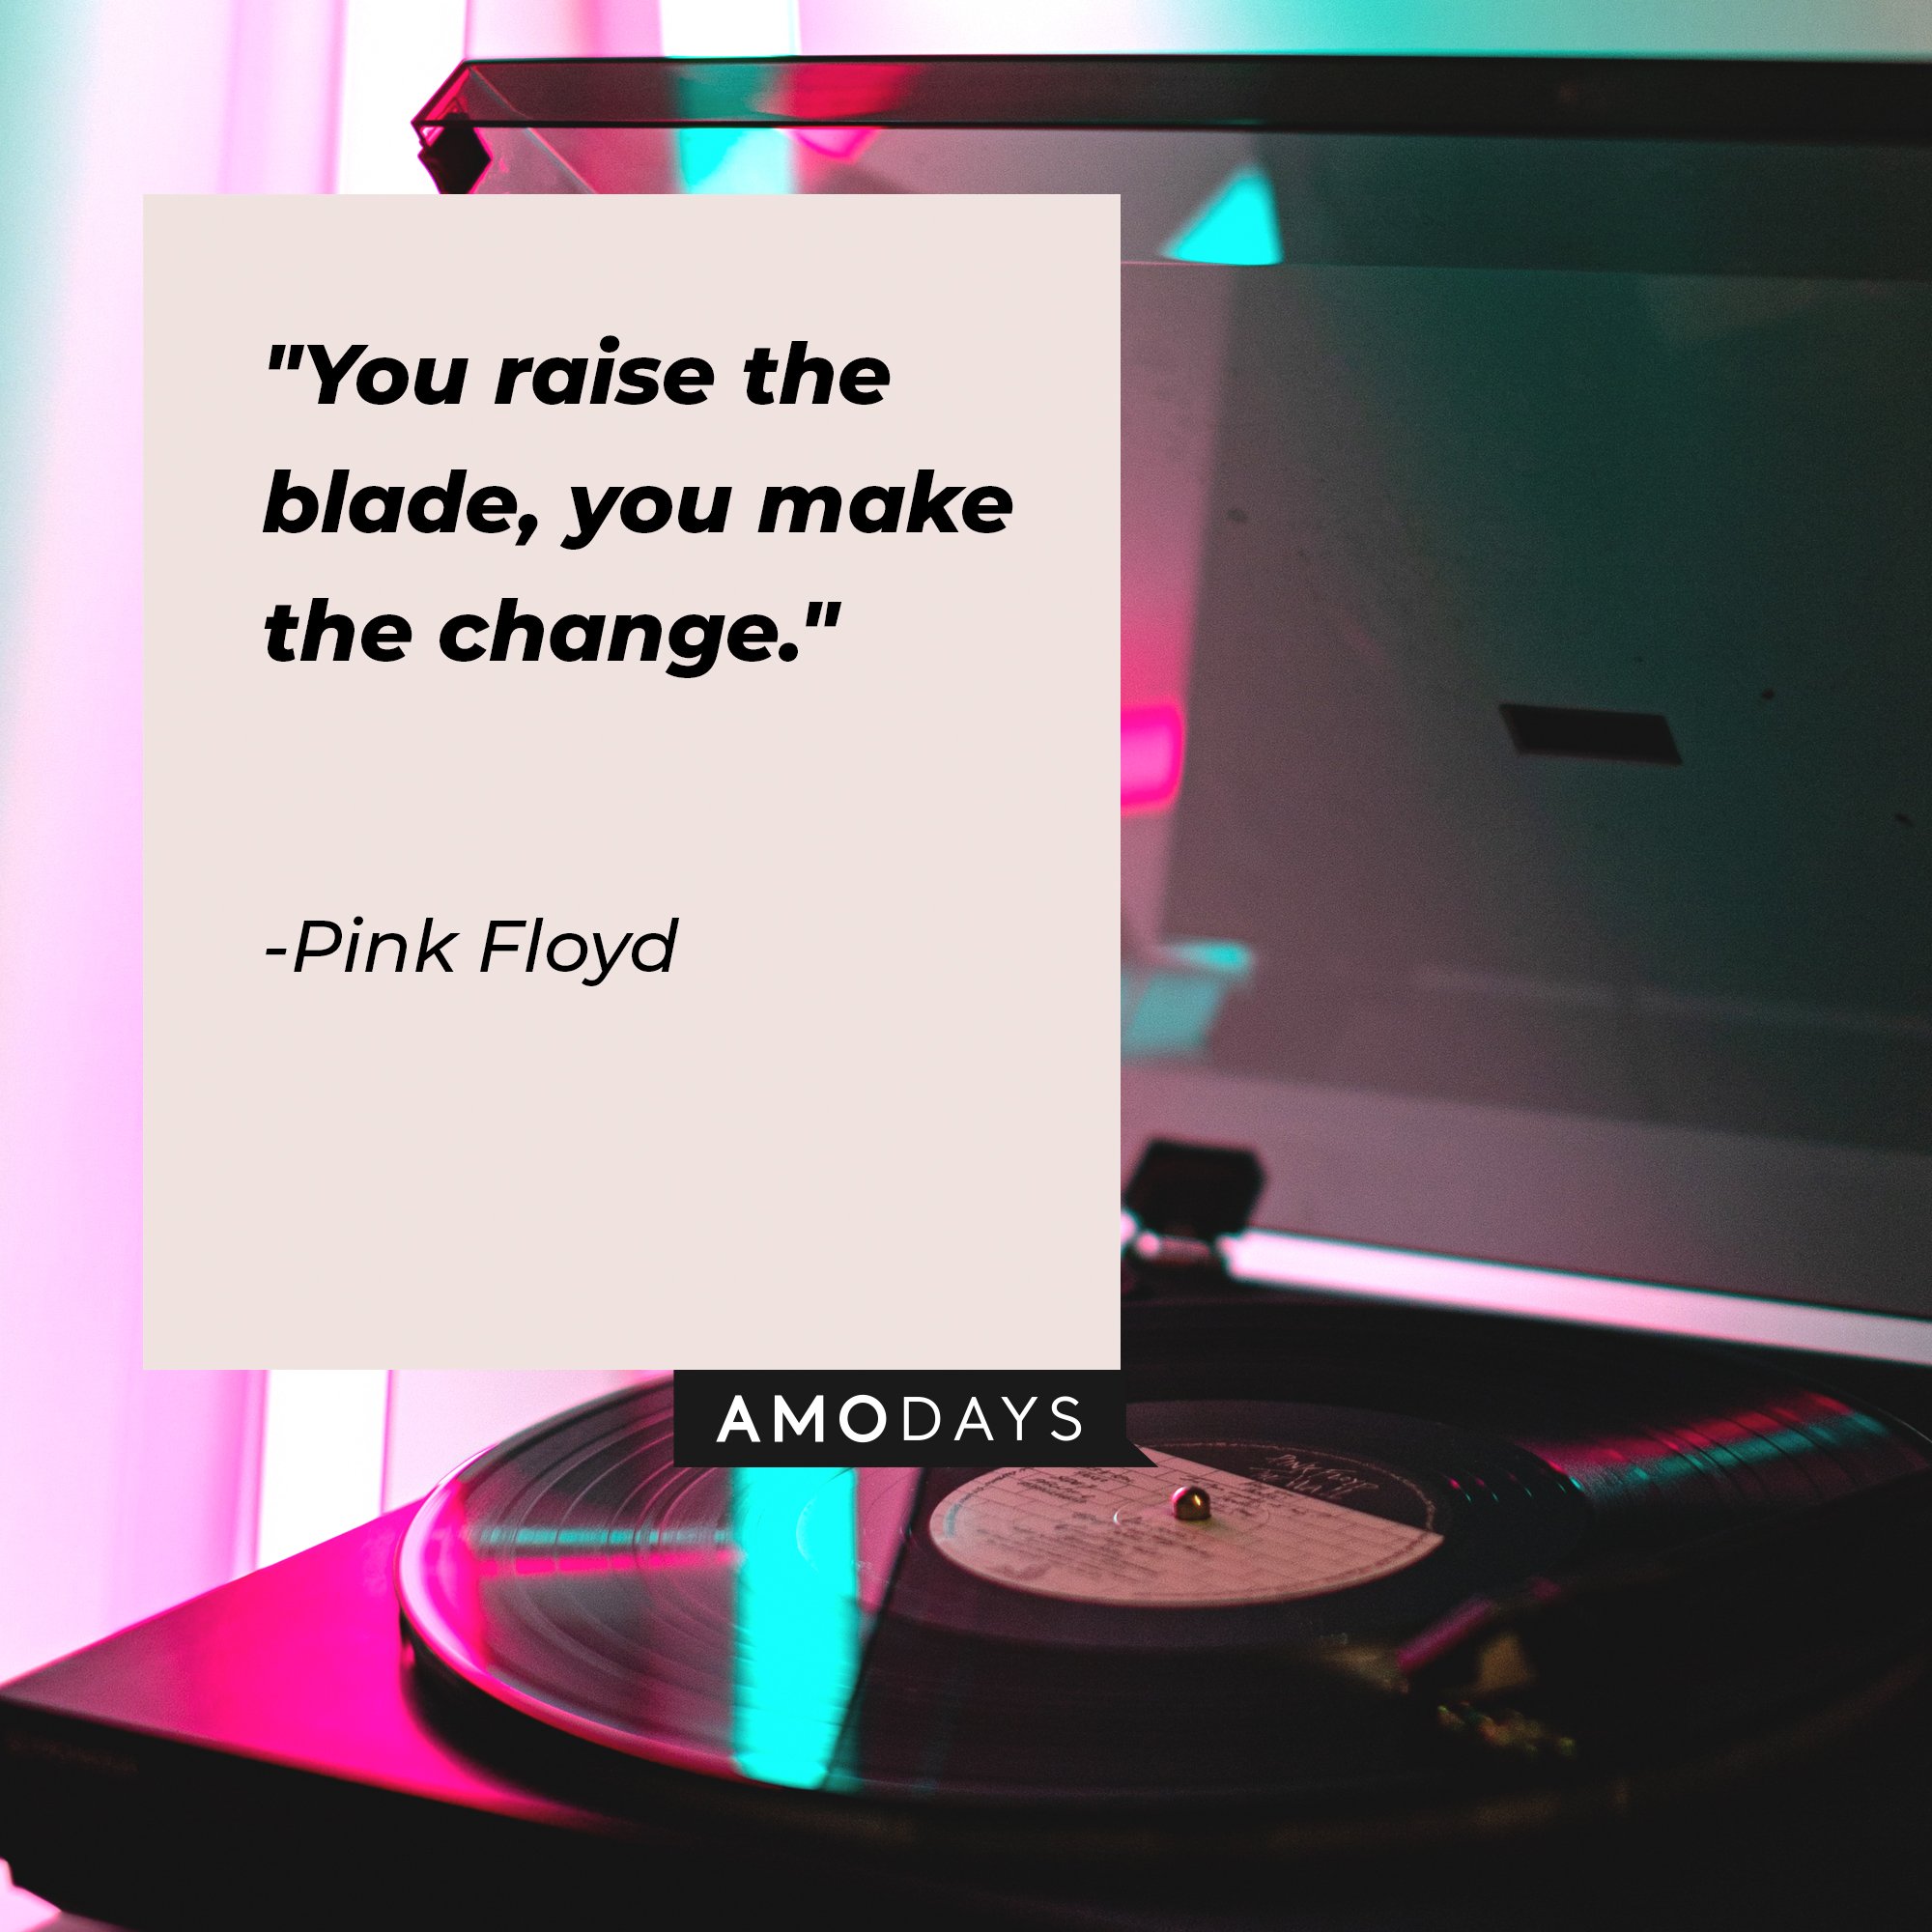 Pink Floyd's quote: "You raise the blade, you make the change." | Image: AmoDays